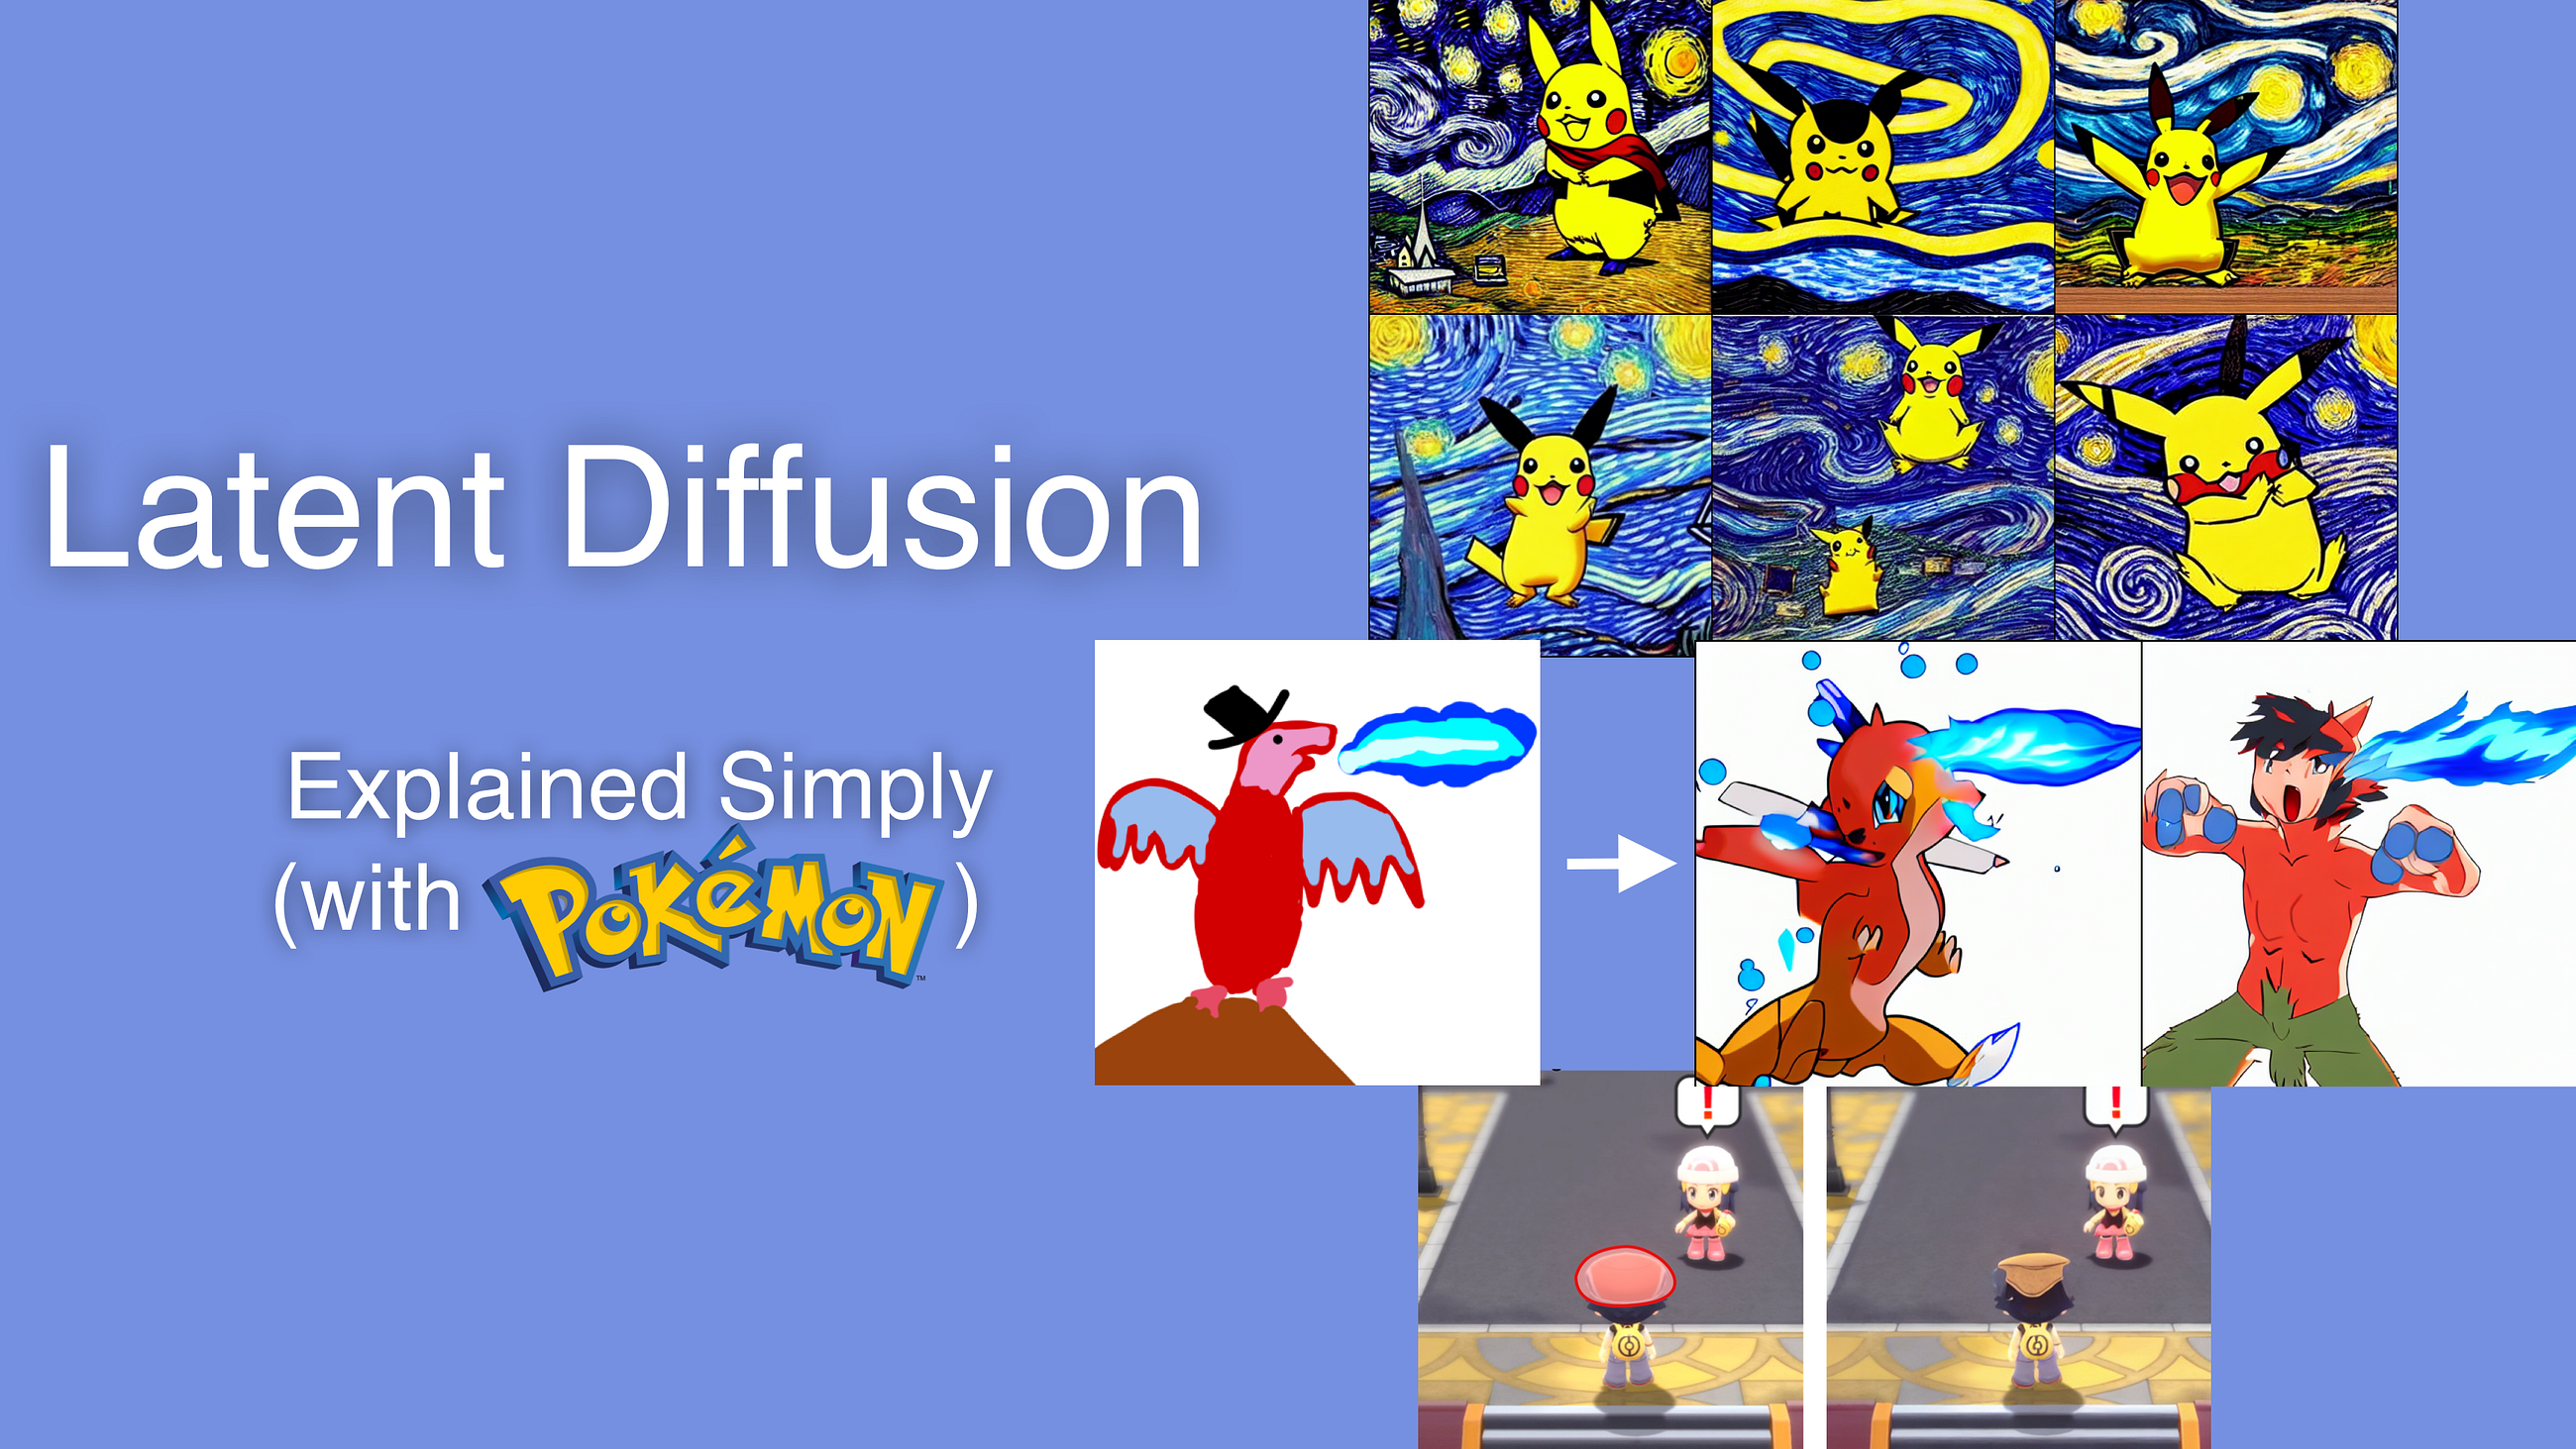 Latent Diffusion Explained Simply (with Pokémon)